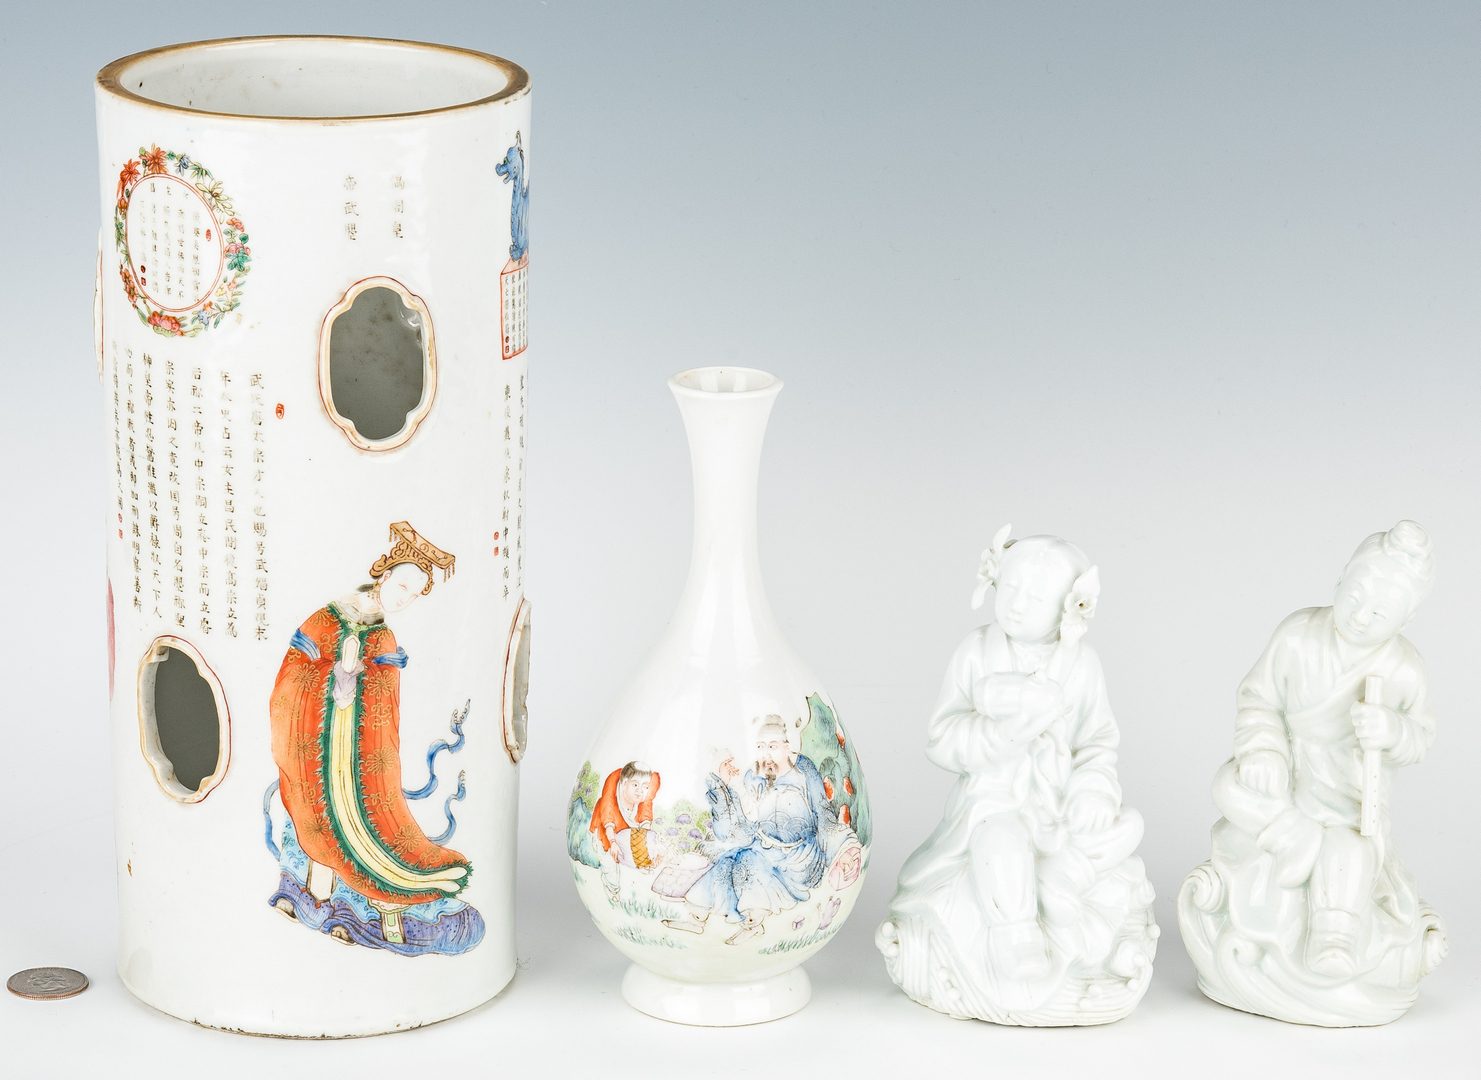 Lot 22: Chinese Hat Stand, Vase and Blanc de Chine Figures, 4 items